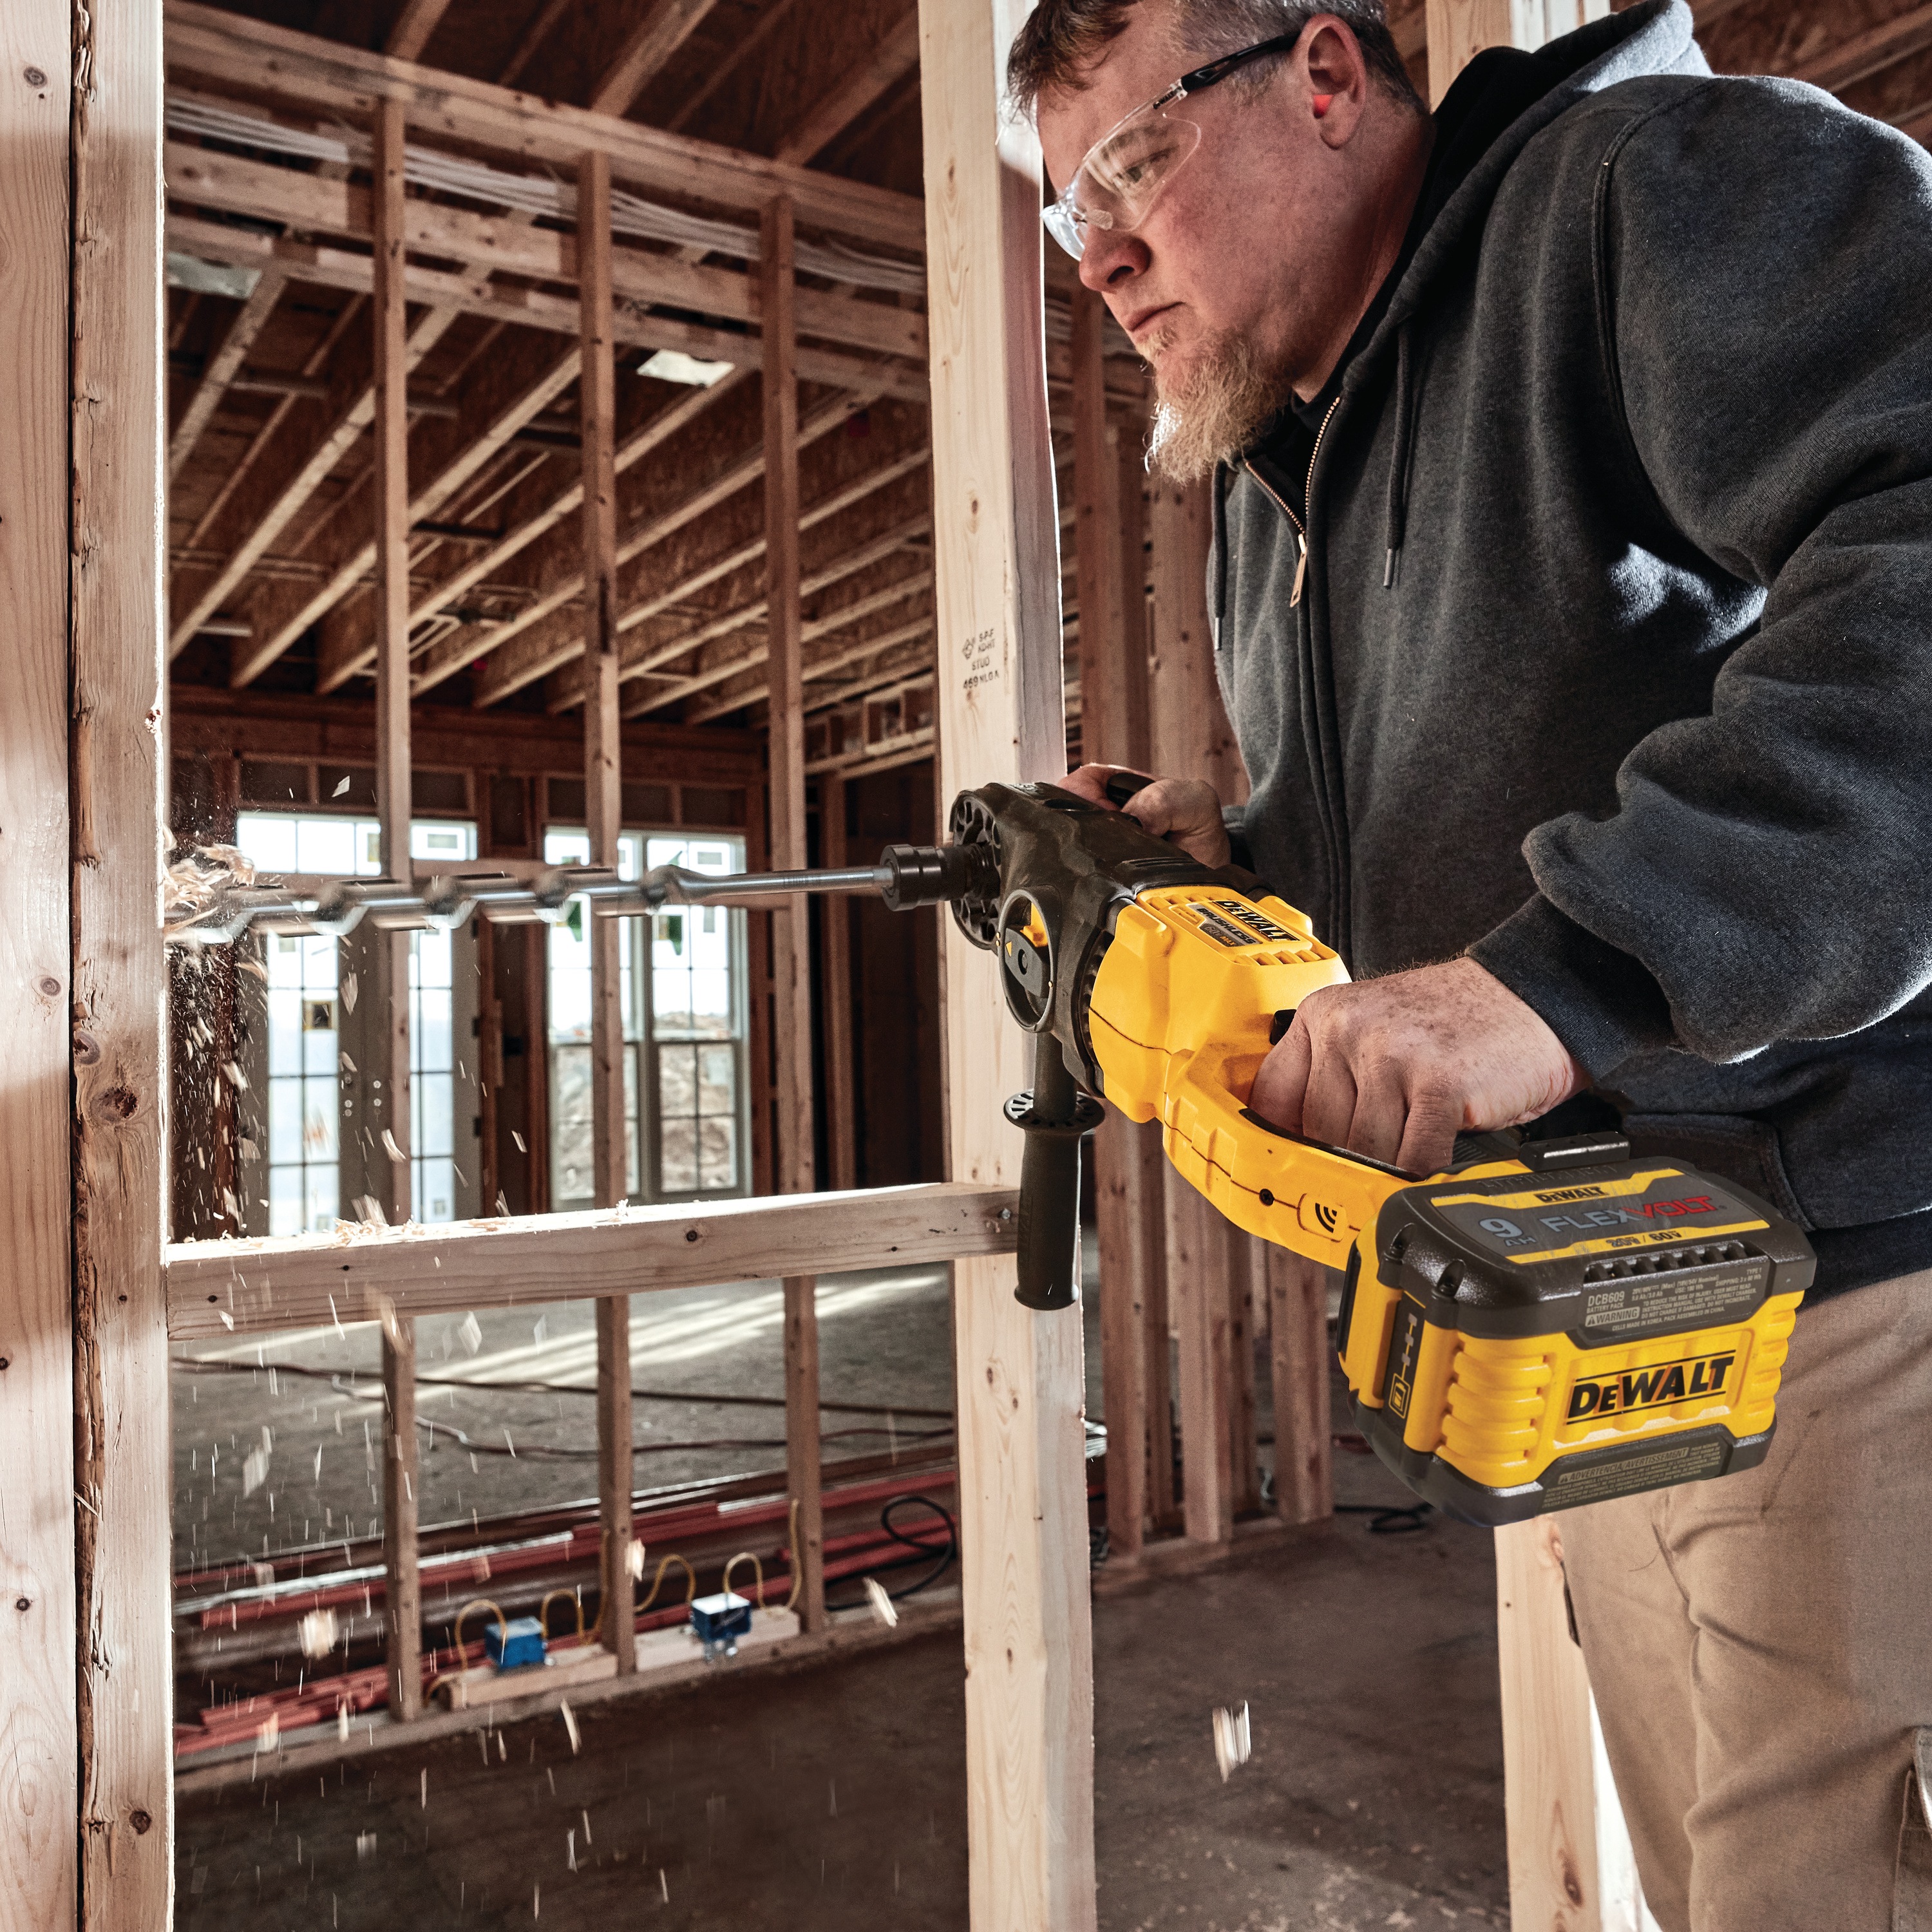 Brushless cordless quick-change stud and joist drill is being used by a person to drill  wood. 